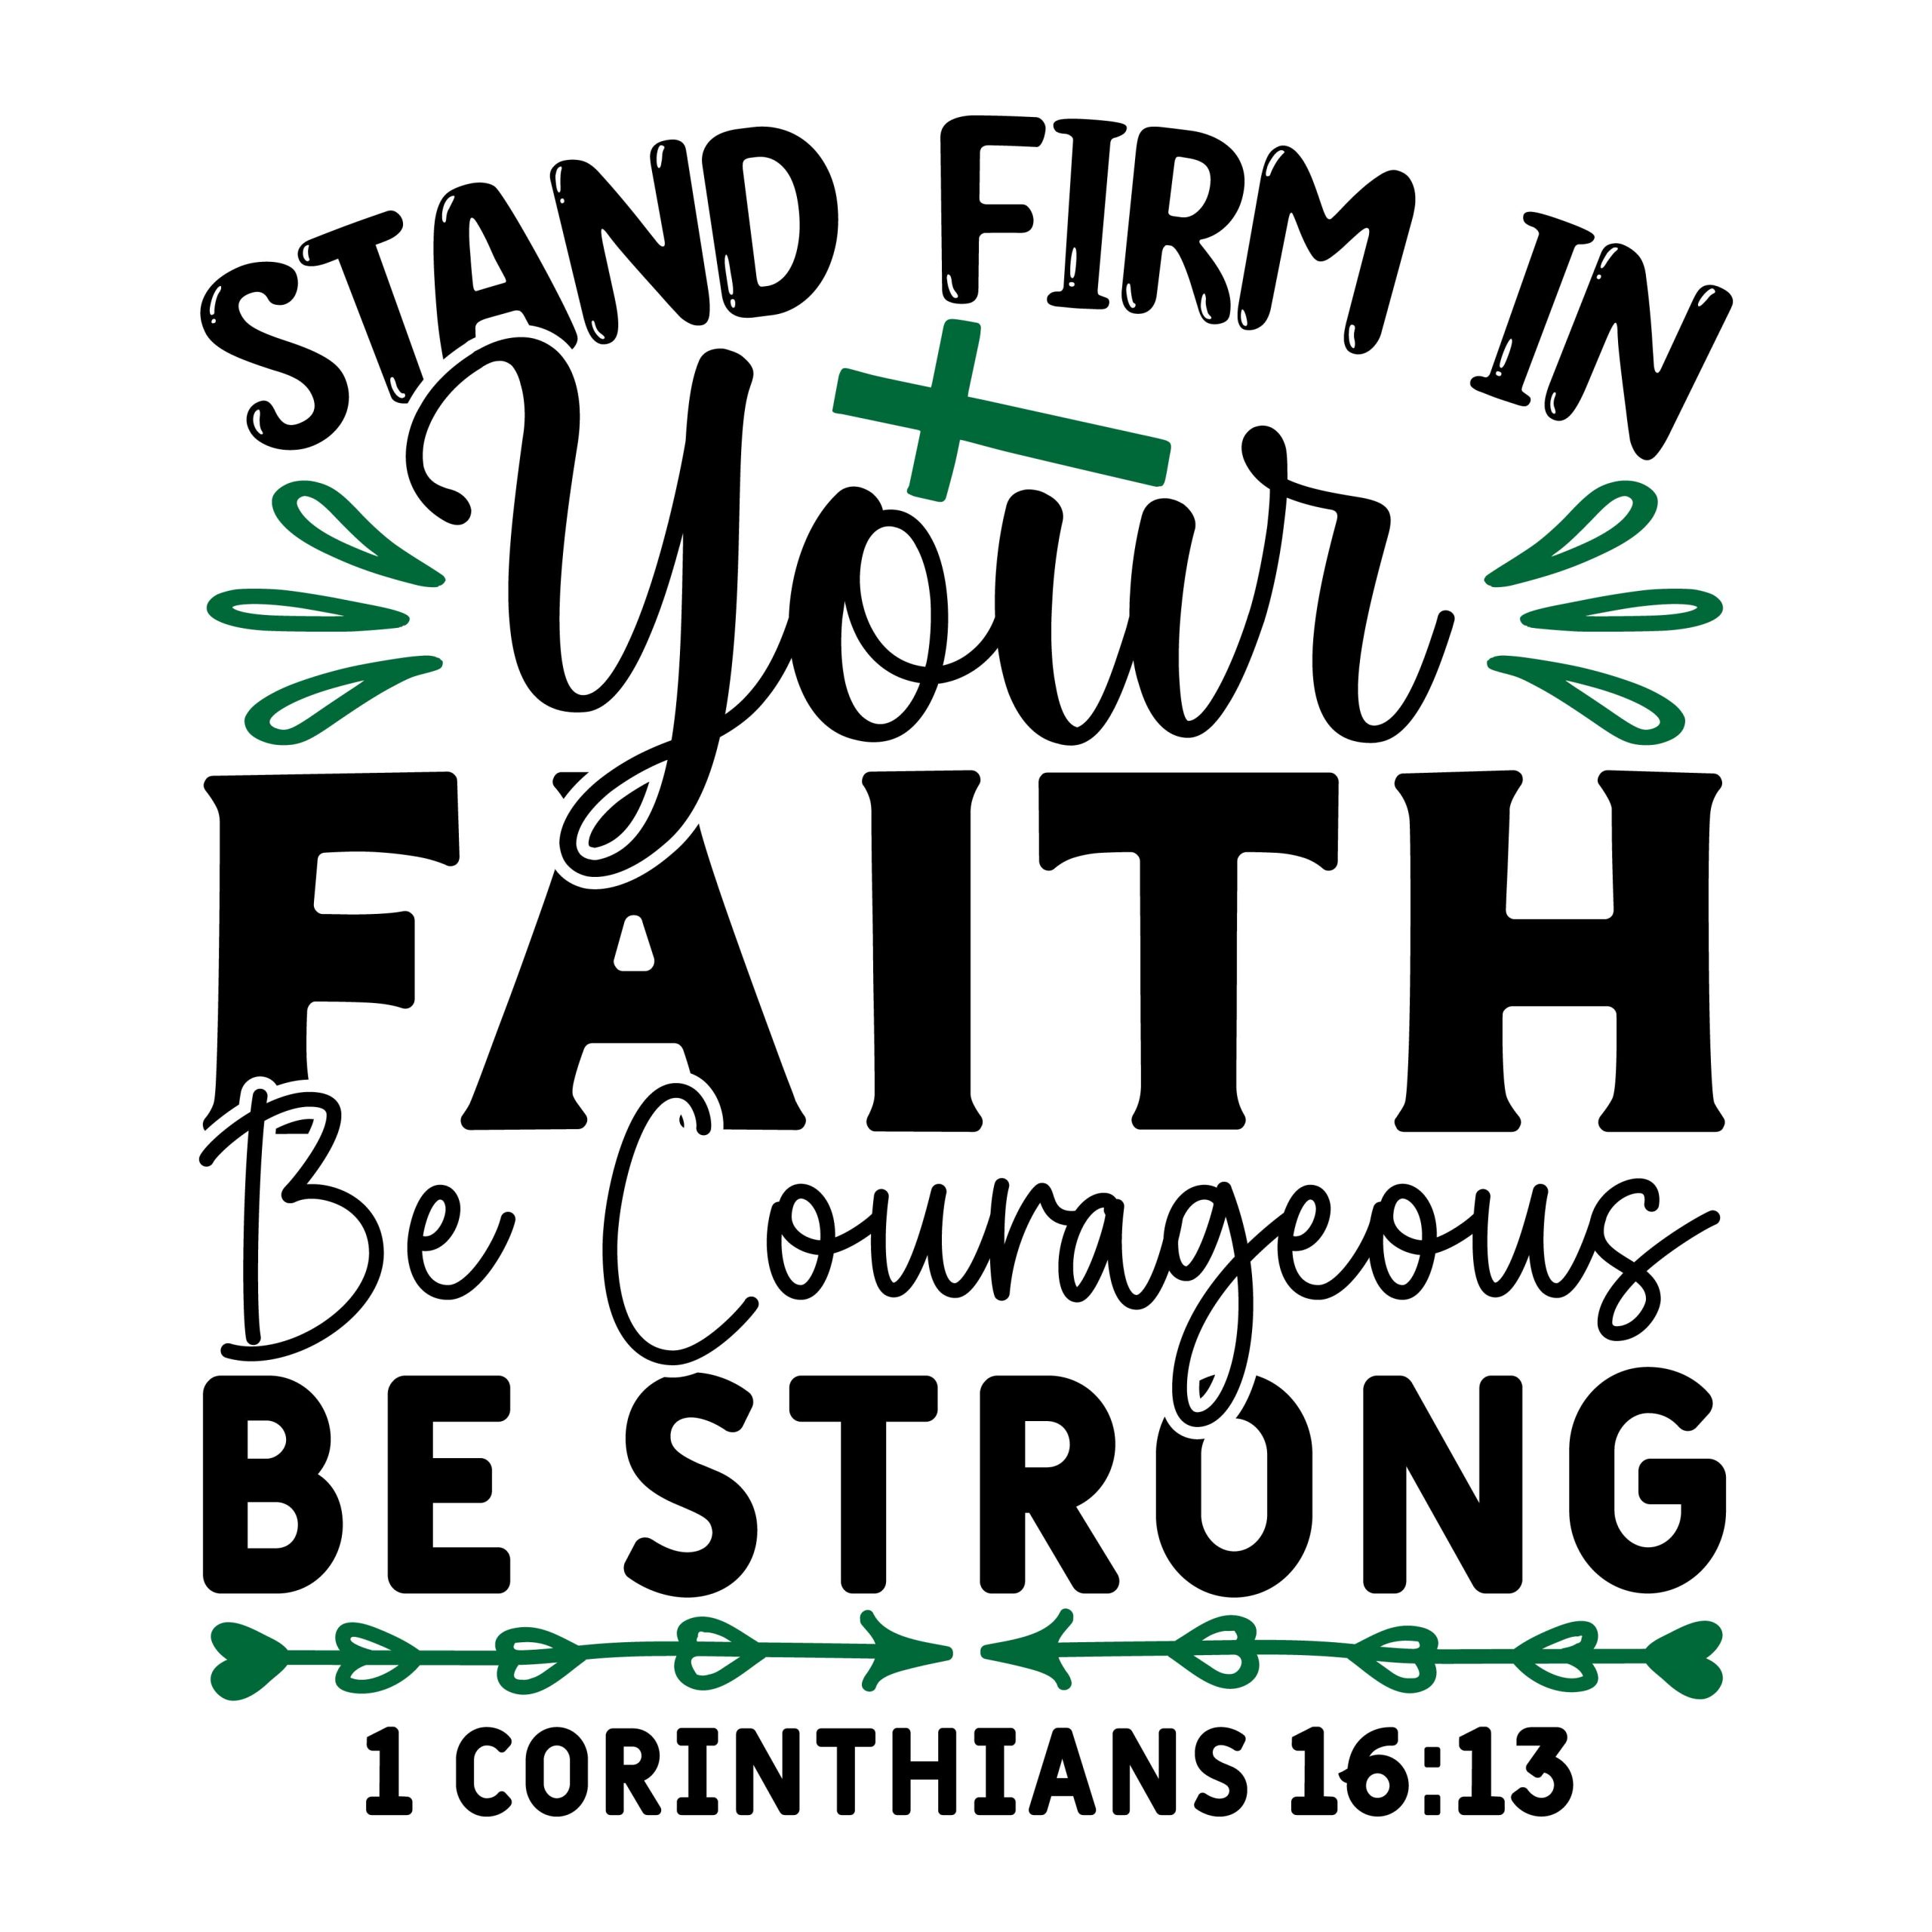 Stand firm in your faith be courageous be strong 1 Corinthians 16:11, bible verses, scripture verses, svg files, passages, sayings, cricut designs, silhouette, embroidery, bundle, free cut files, design space, vector